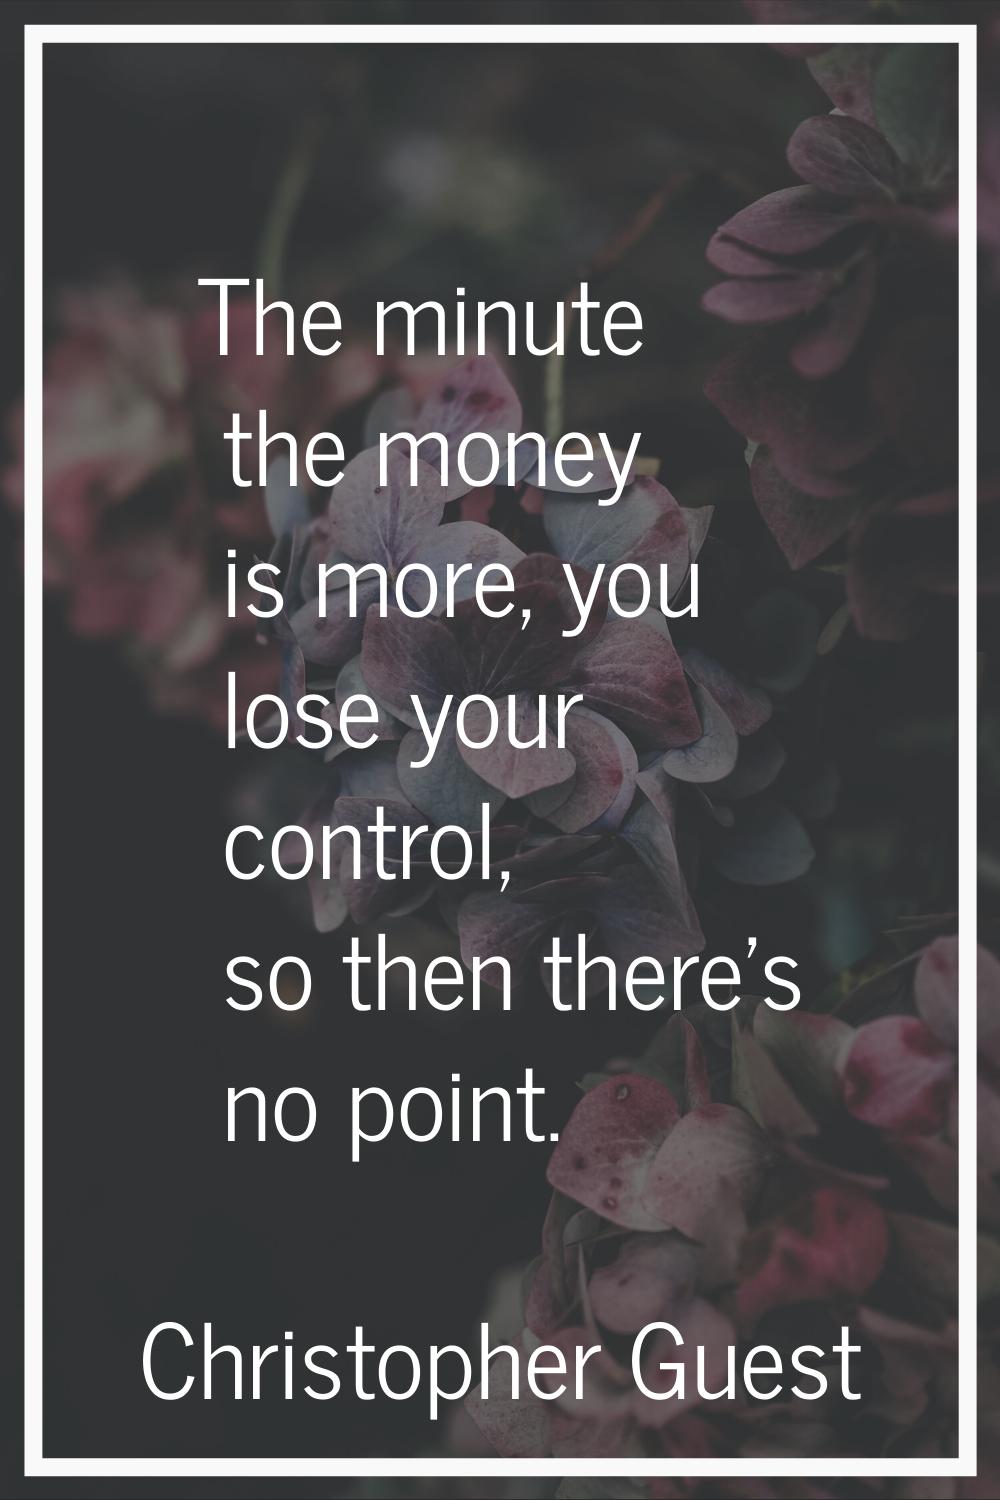 The minute the money is more, you lose your control, so then there's no point.